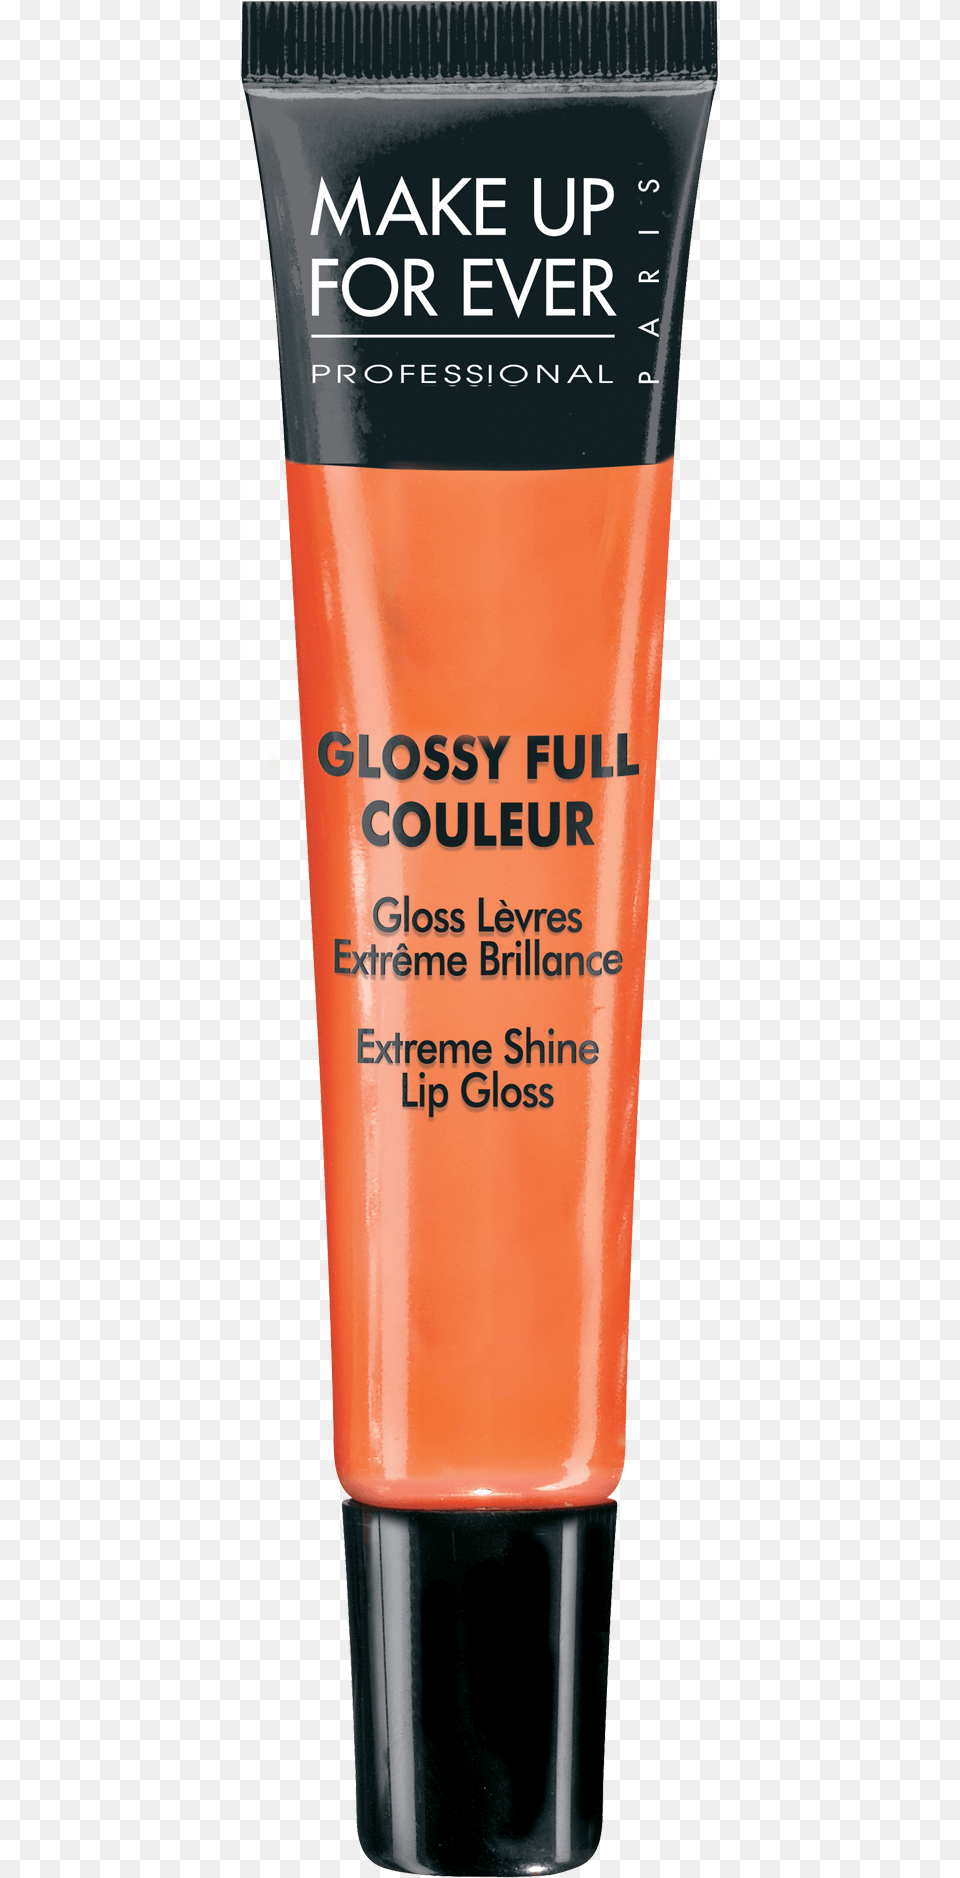 Glossy Full Couleur Makeup Forever Glossy Full Couleur, Bottle, Aftershave, Cosmetics Free Png